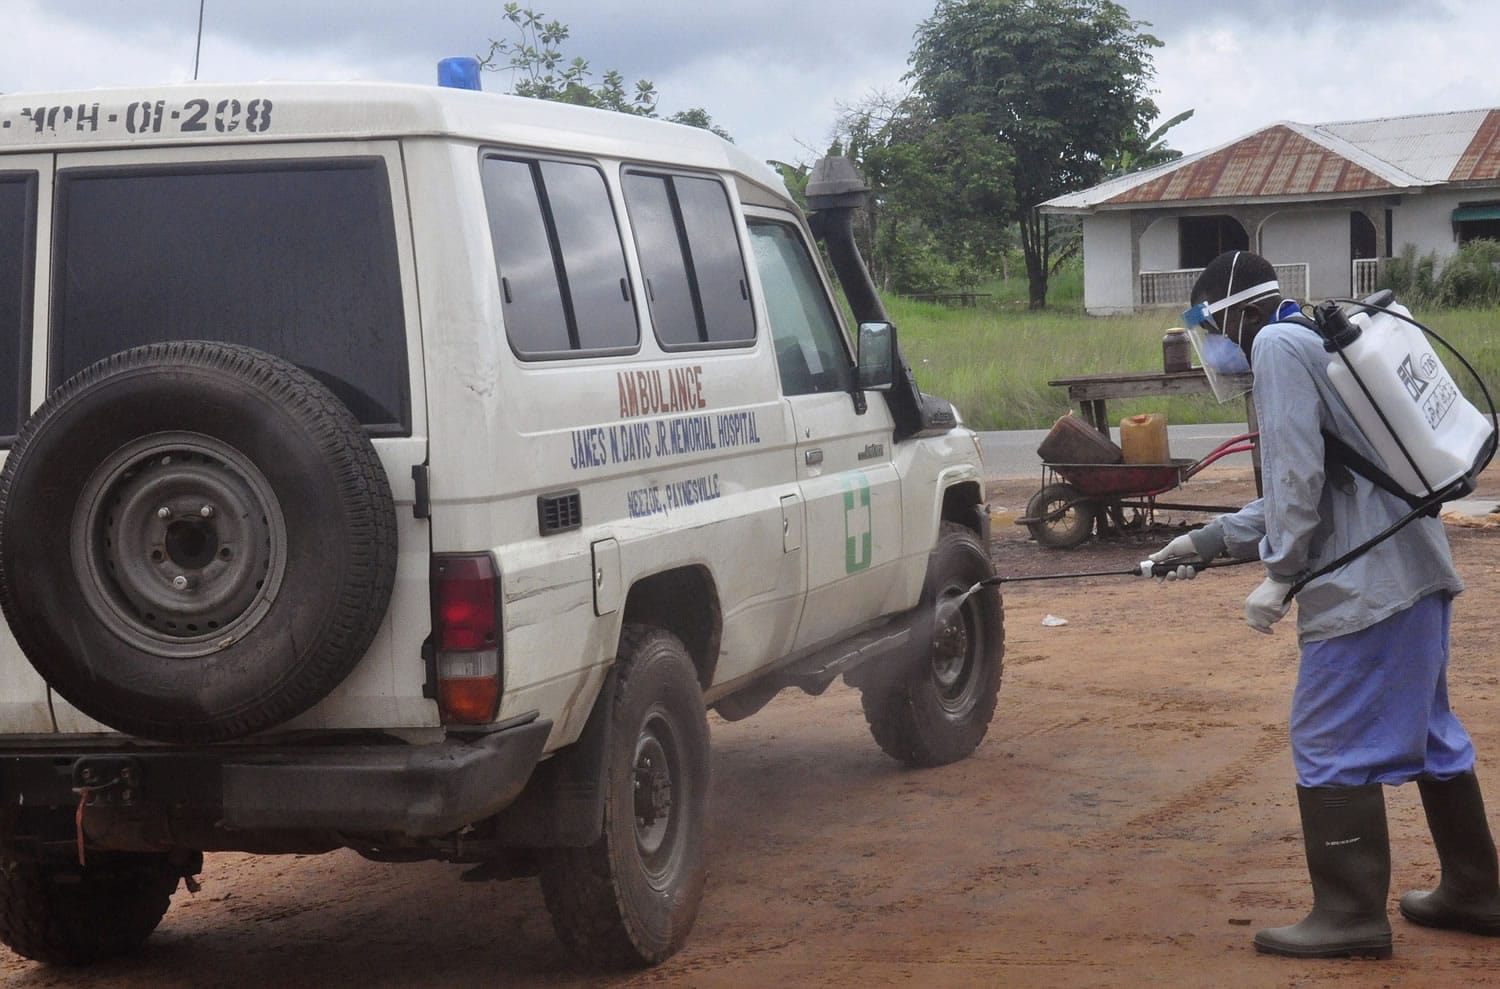 Ebola health workers spray disinfectant on an ambulance that was used to transport two people suspected of having the Ebola virus  on the outskirts of Monrovia, Liberia, on Wednesday.